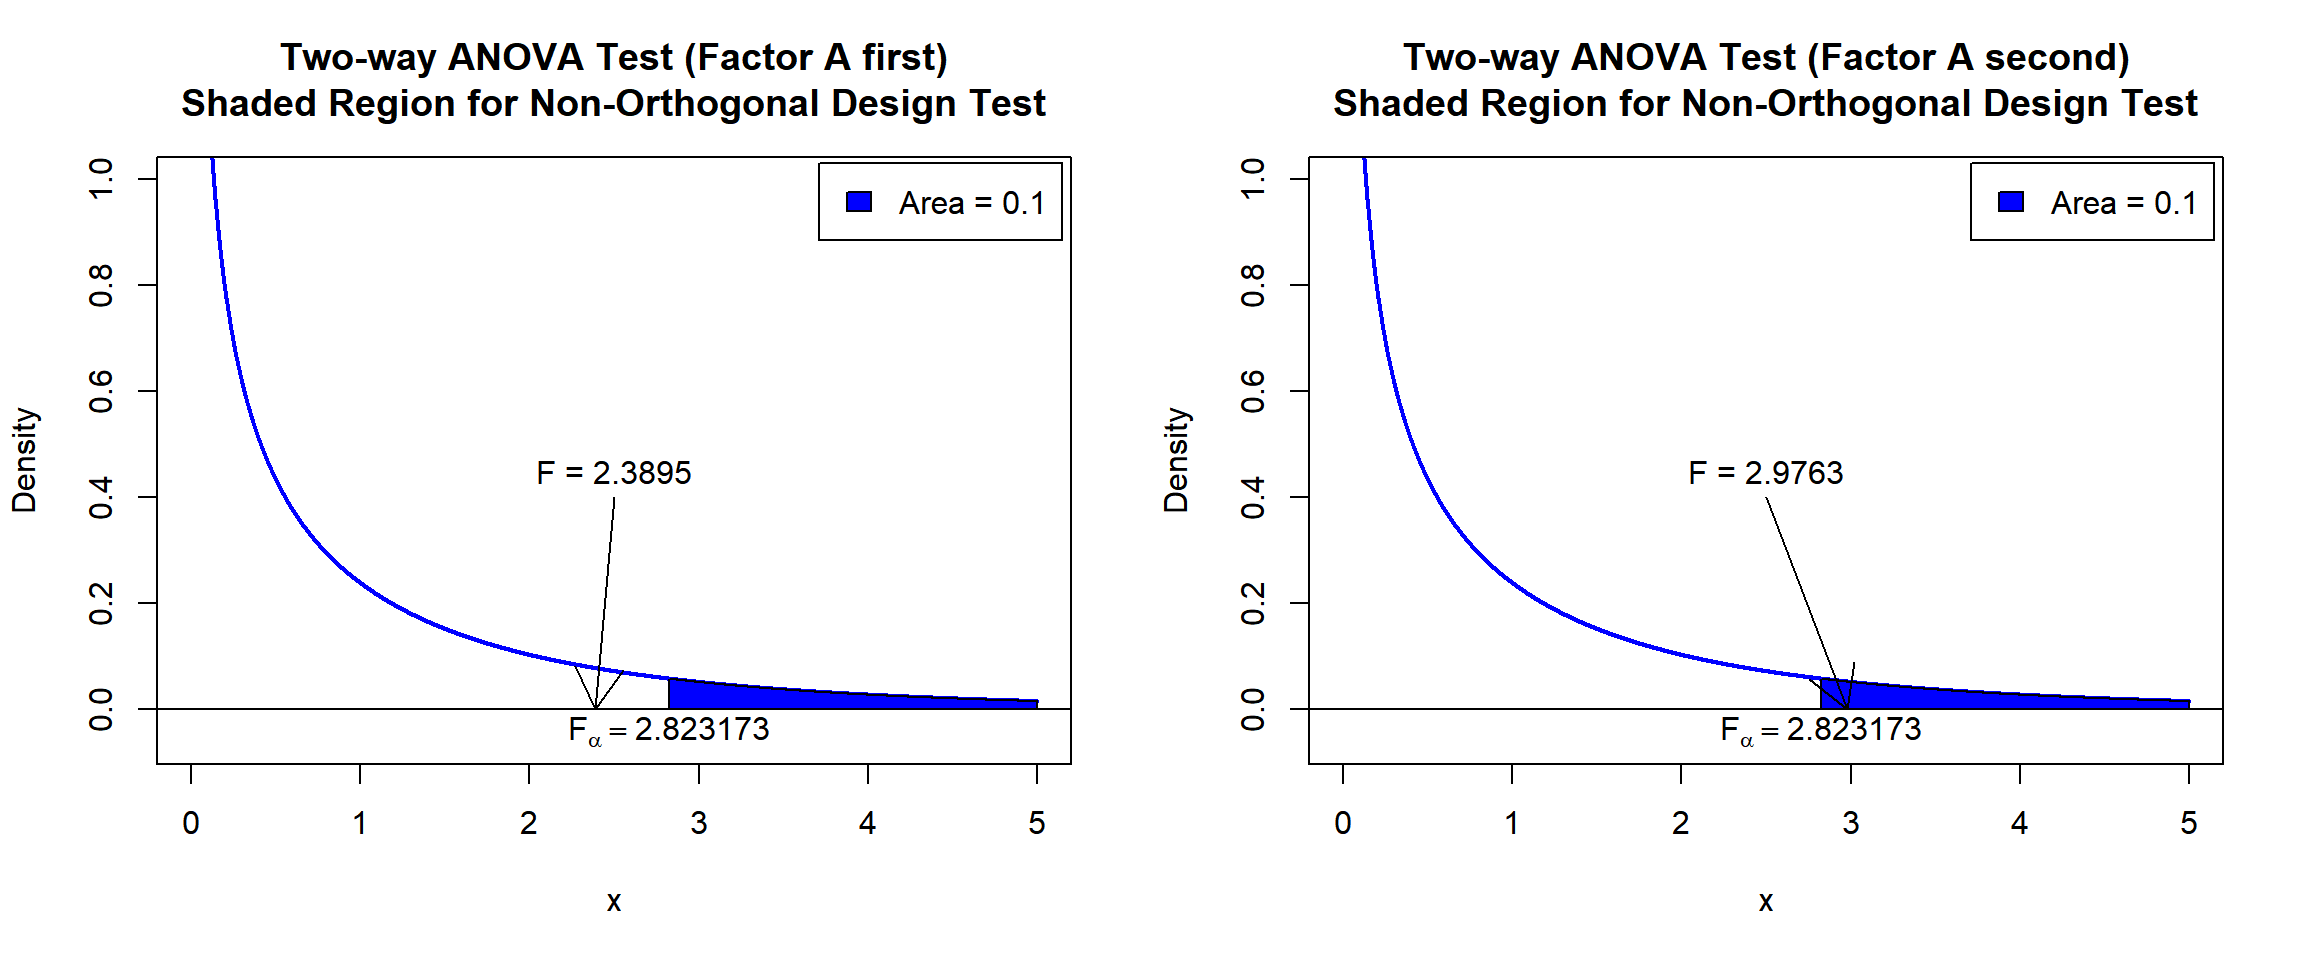 Two-way ANOVA Test Shaded Region for Non-Orthogonal Design Test in R